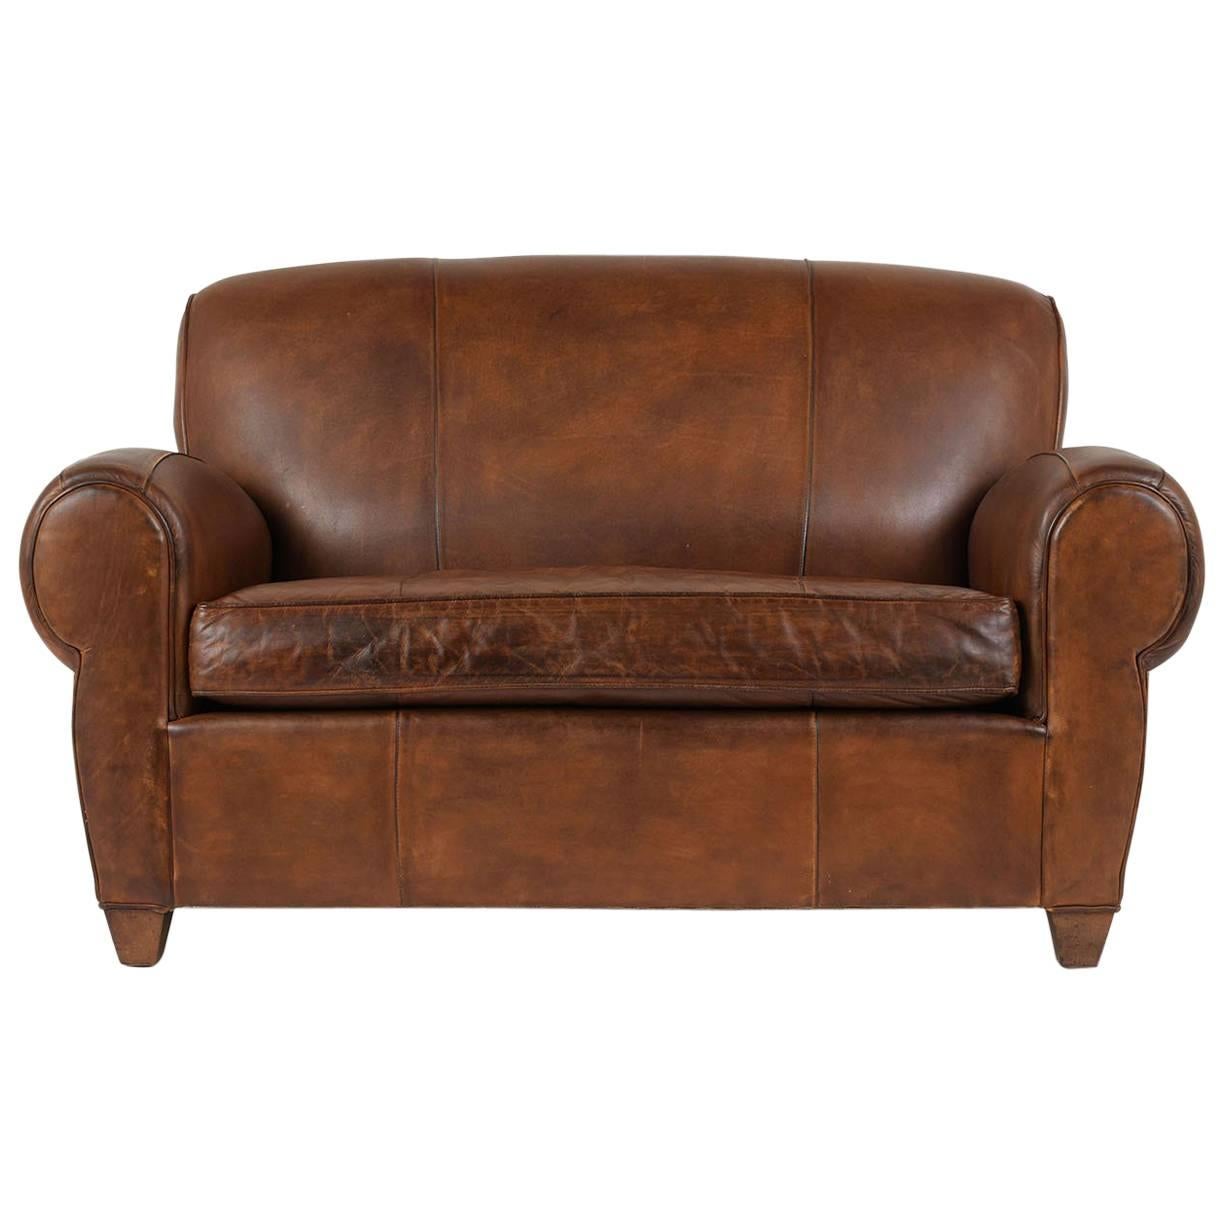 French Art Deco-Style Leather Loveseat